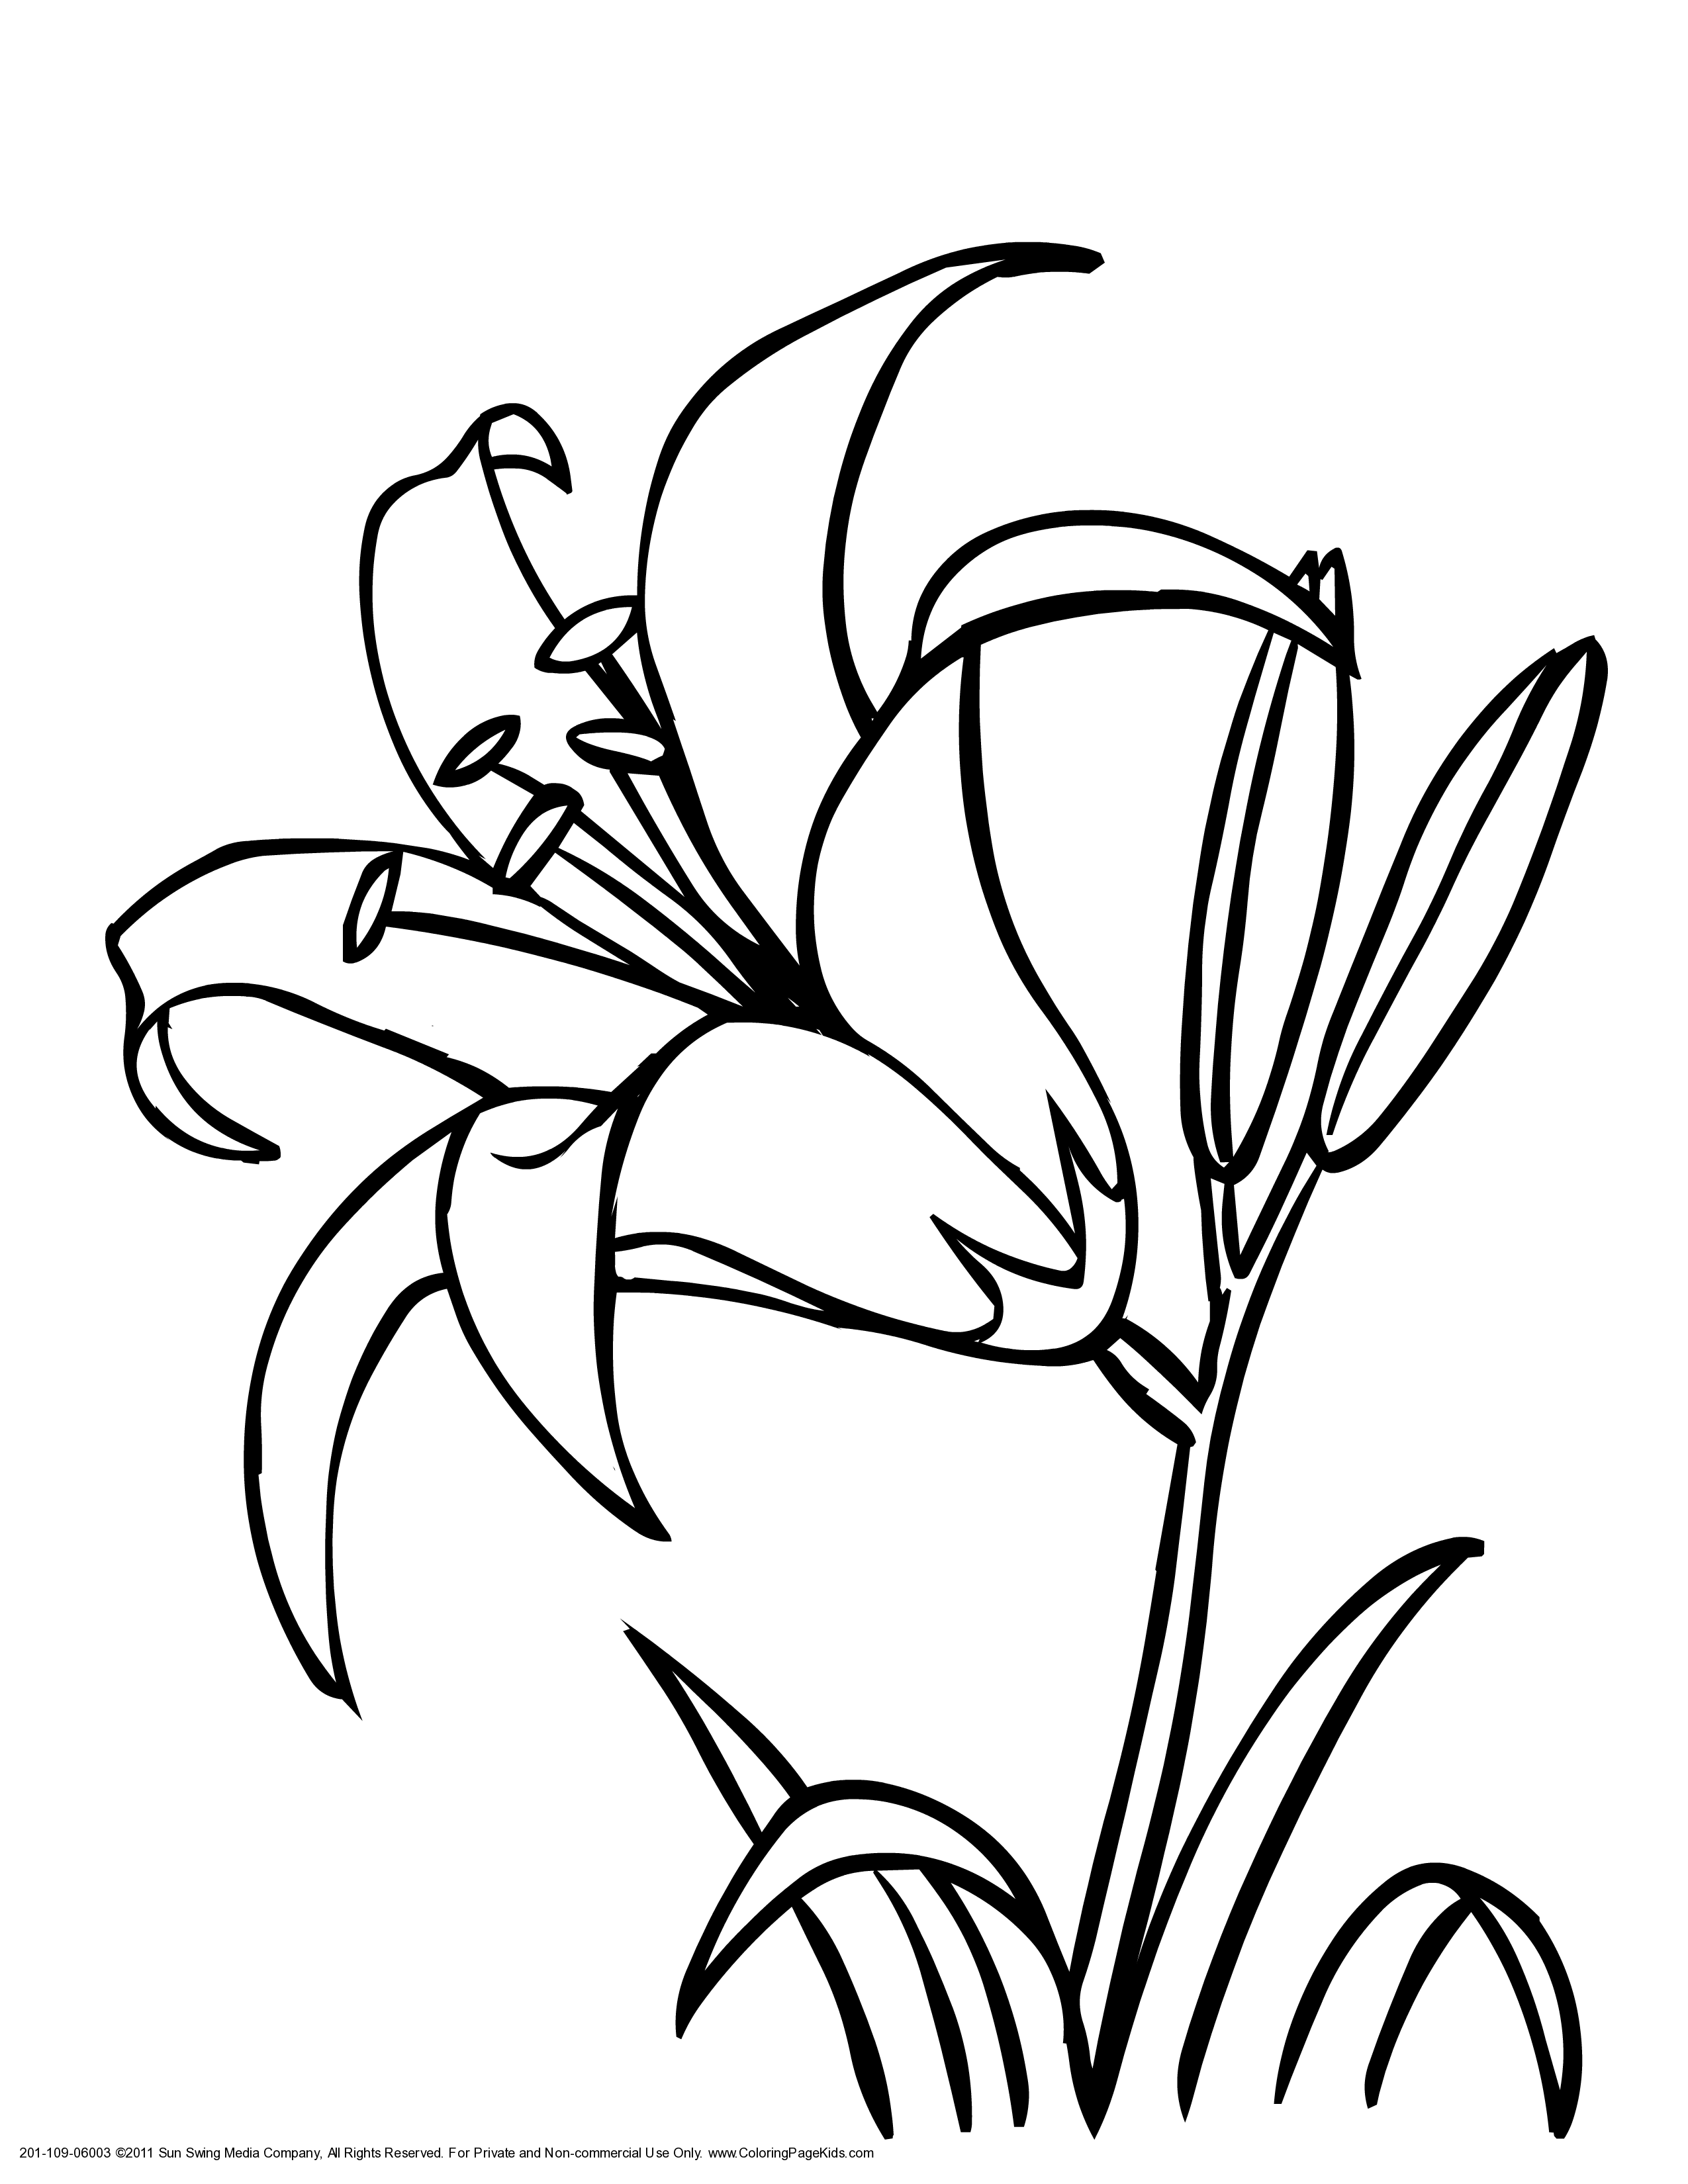 Lily Outline - AZ Coloring Pages